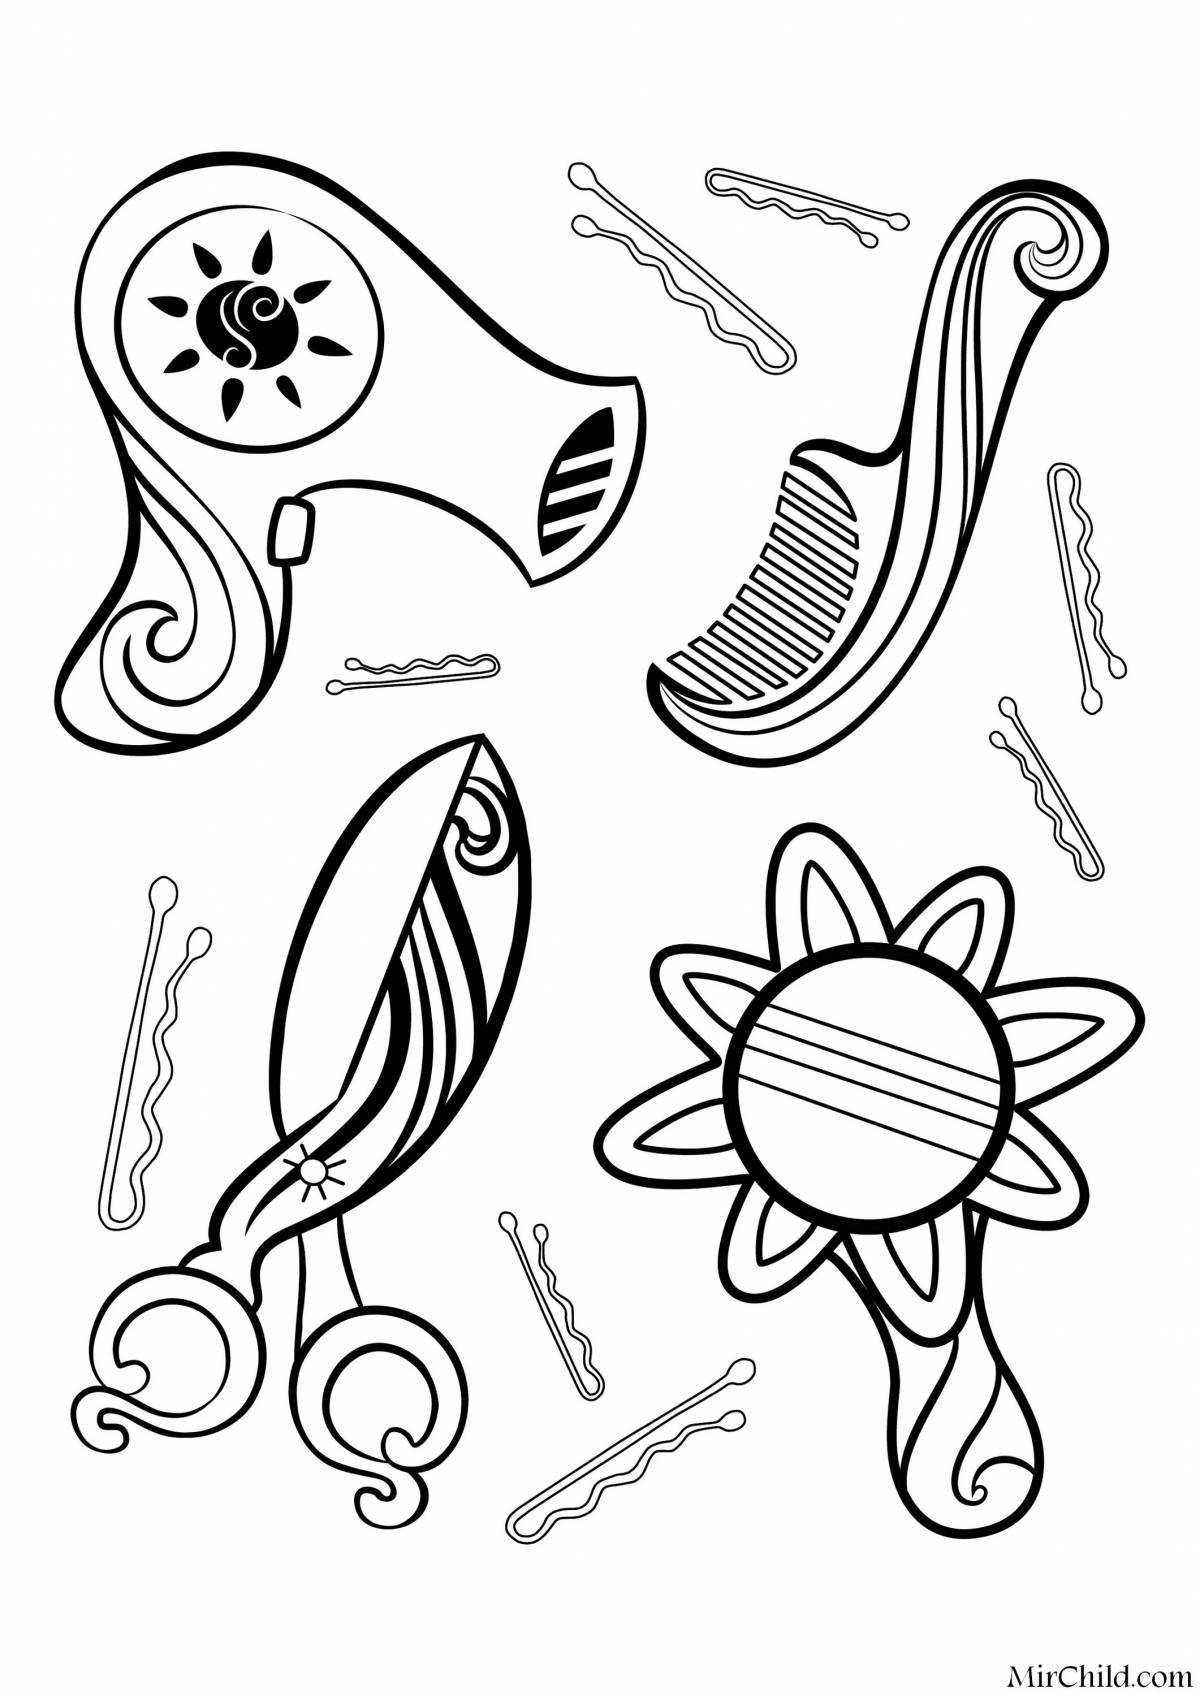 Attractive hairdressing coloring book for kids